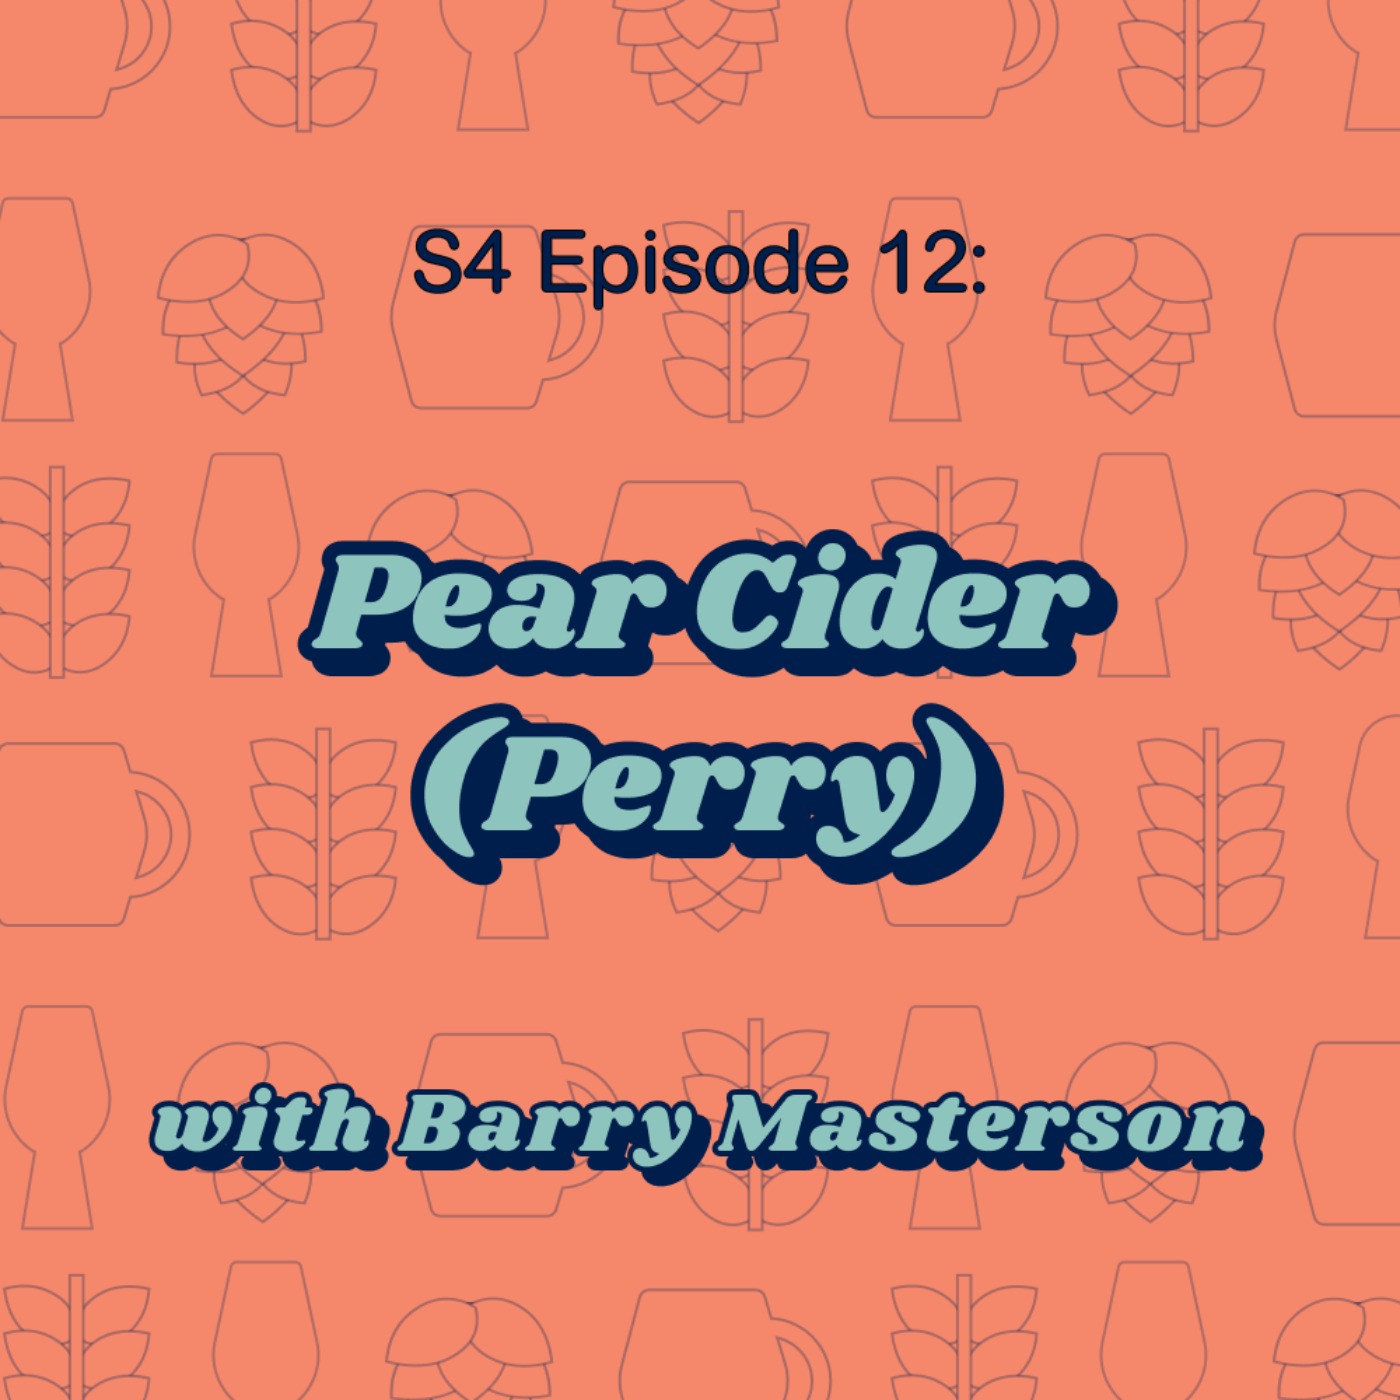 Pear Cider (Perry) with Barry Masterson